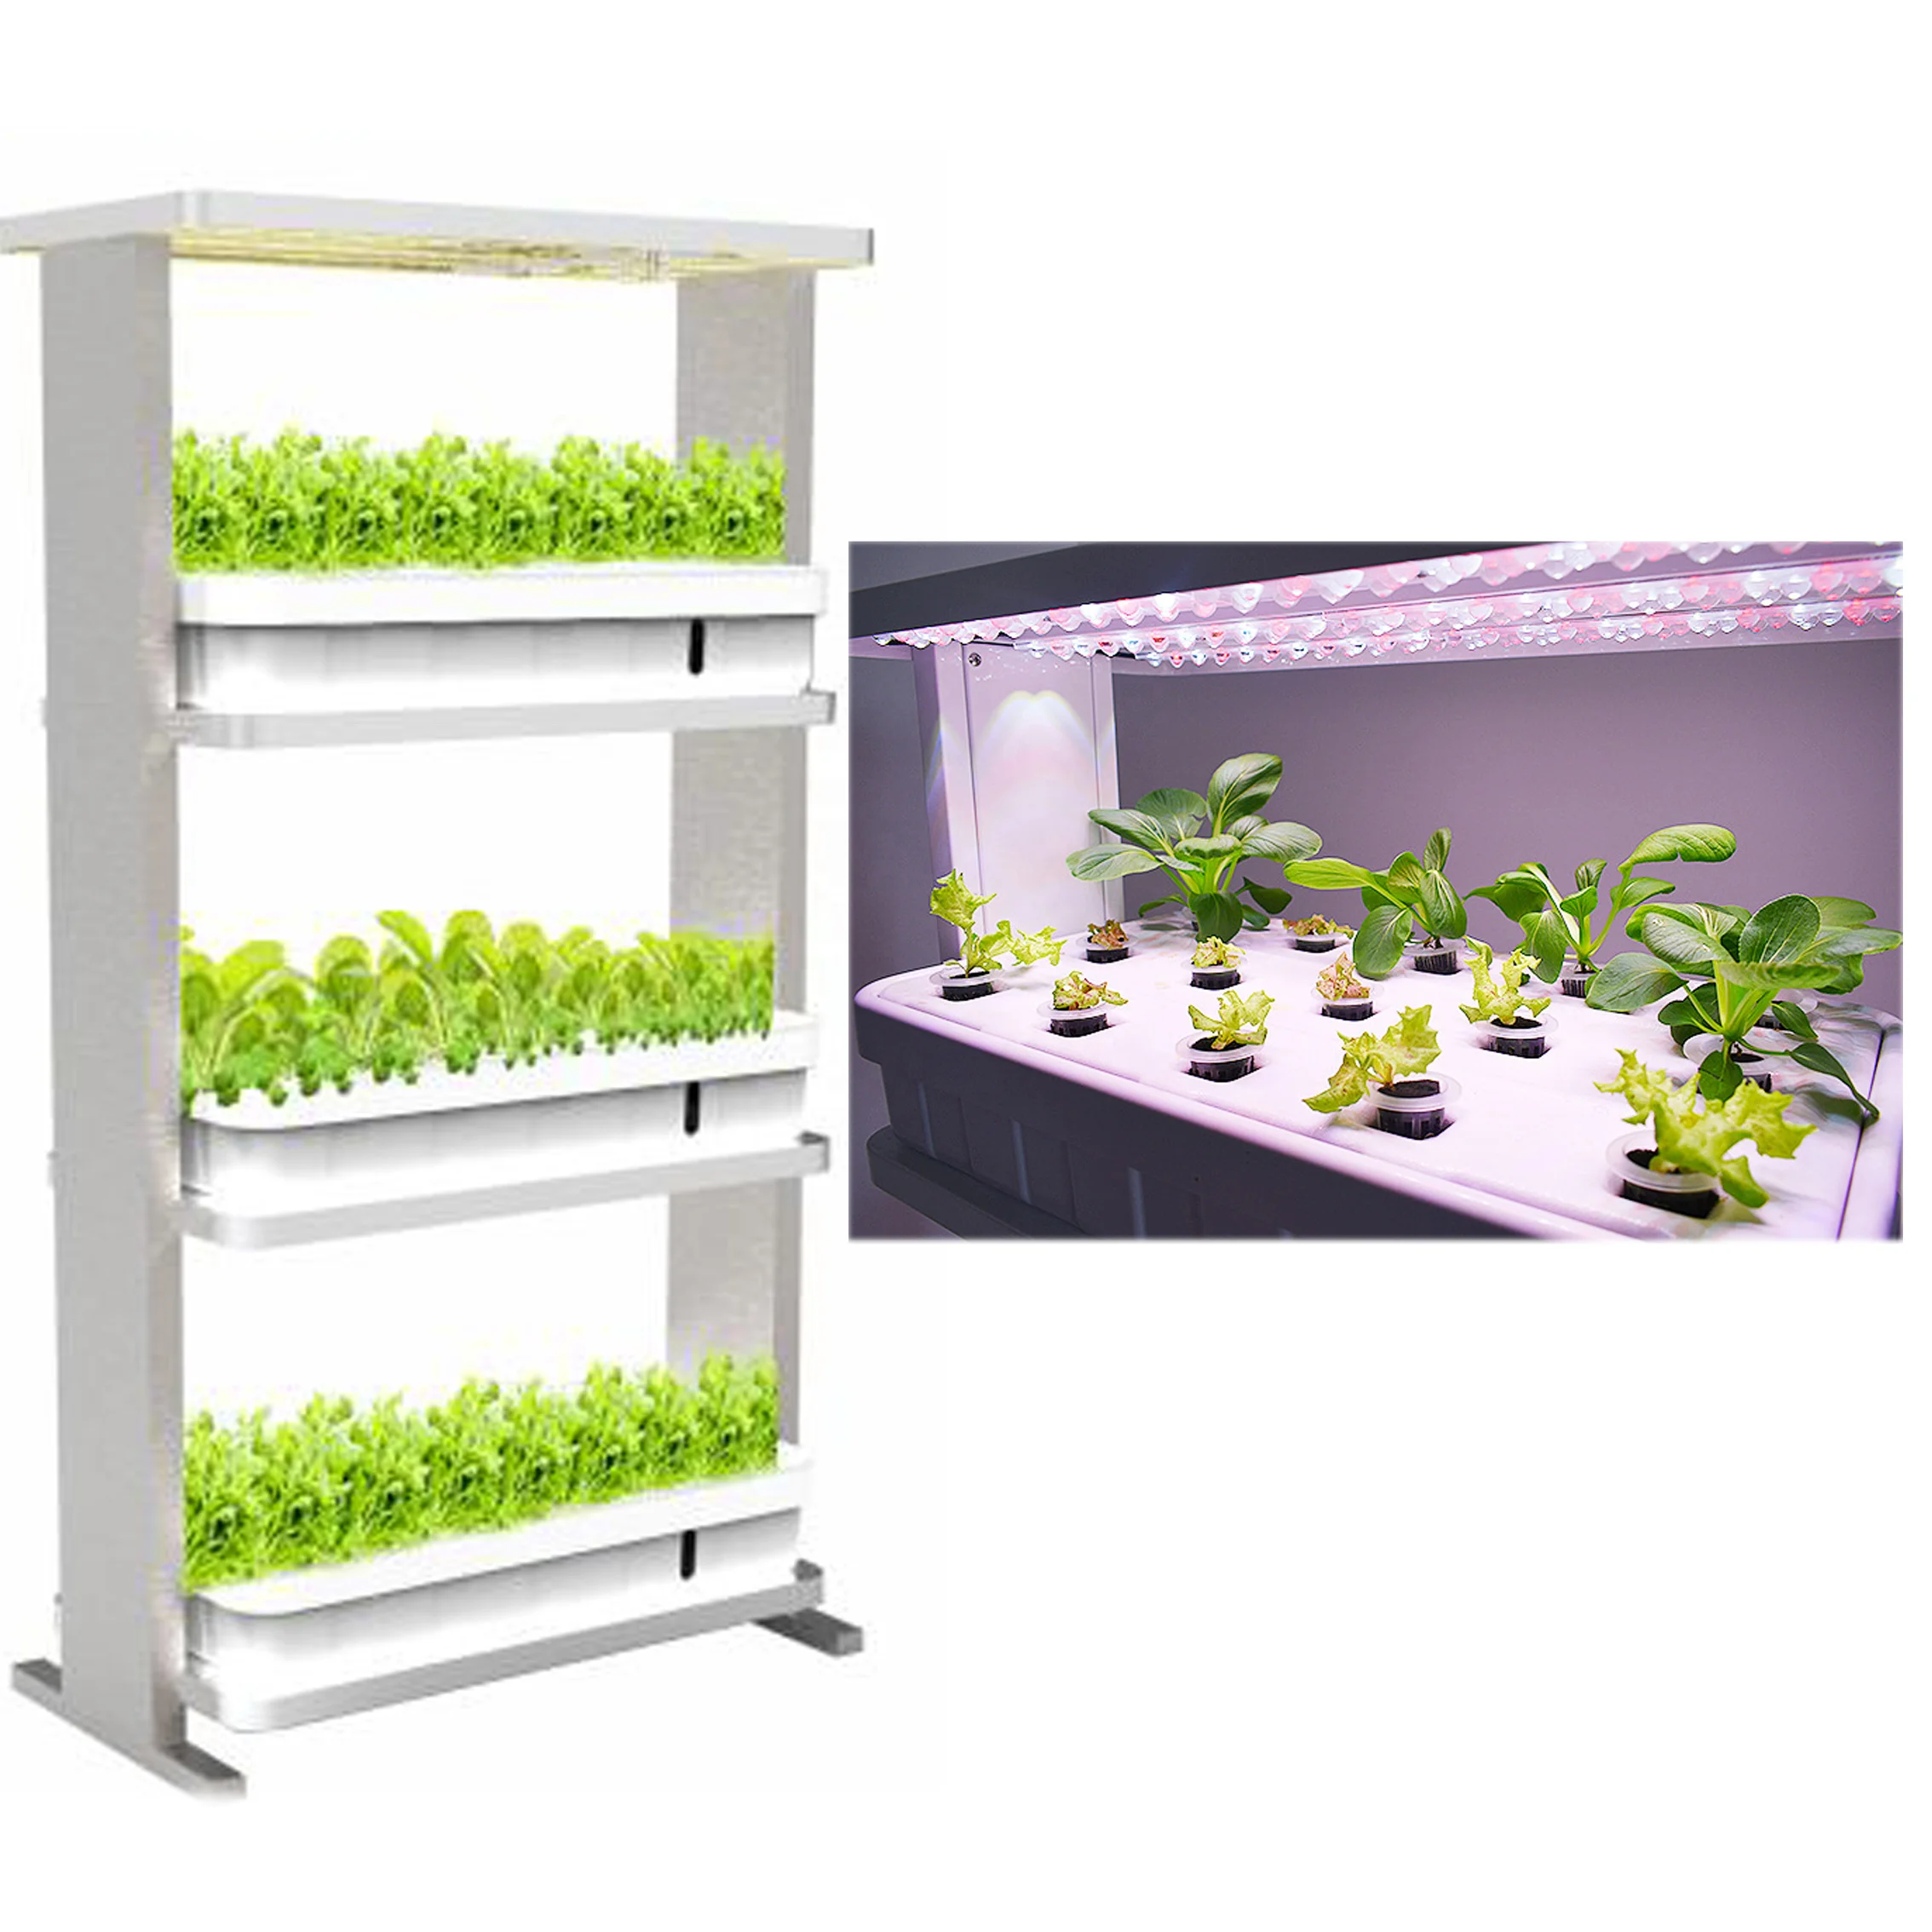 Hydroponic Growing Systems Indoor Vegetable Herbs Led Grow Light Hydroponic Vertical Gardening Kits Buy Hydroponic Kits Vertical Hydroponic System Indoor Vegetable Garden Kit Product On Alibaba Com